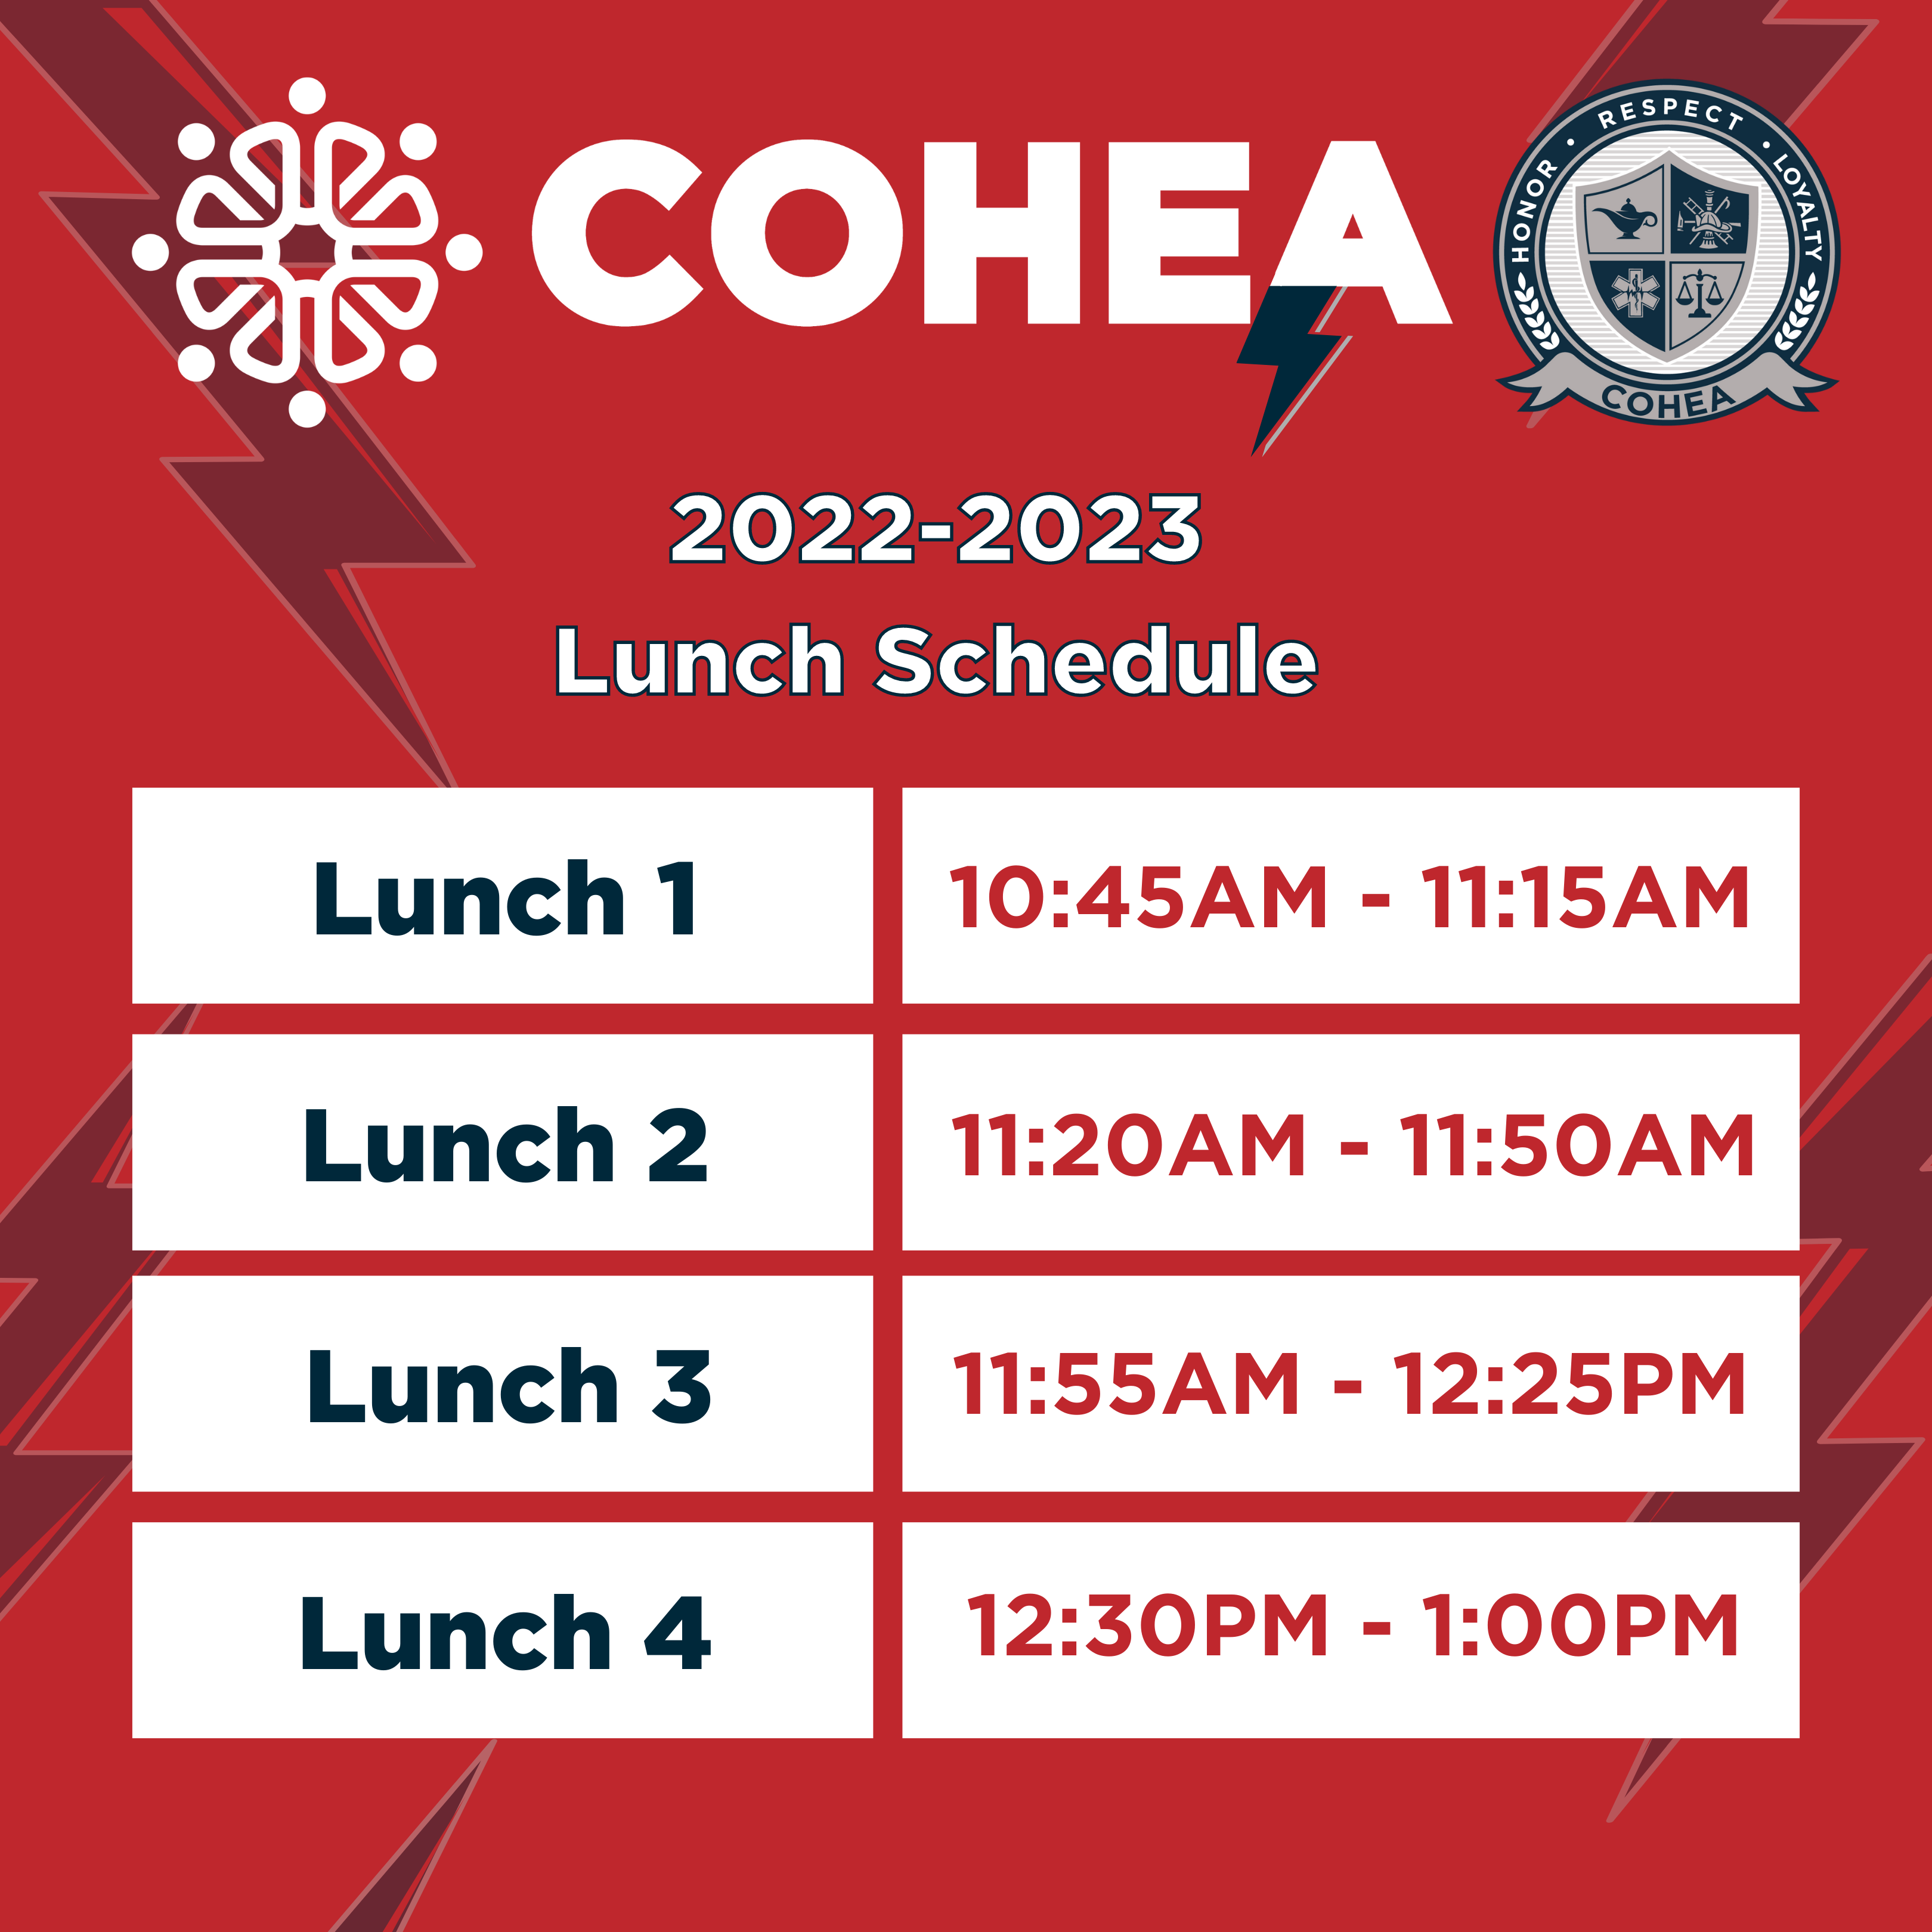 Lunch times for COHEA